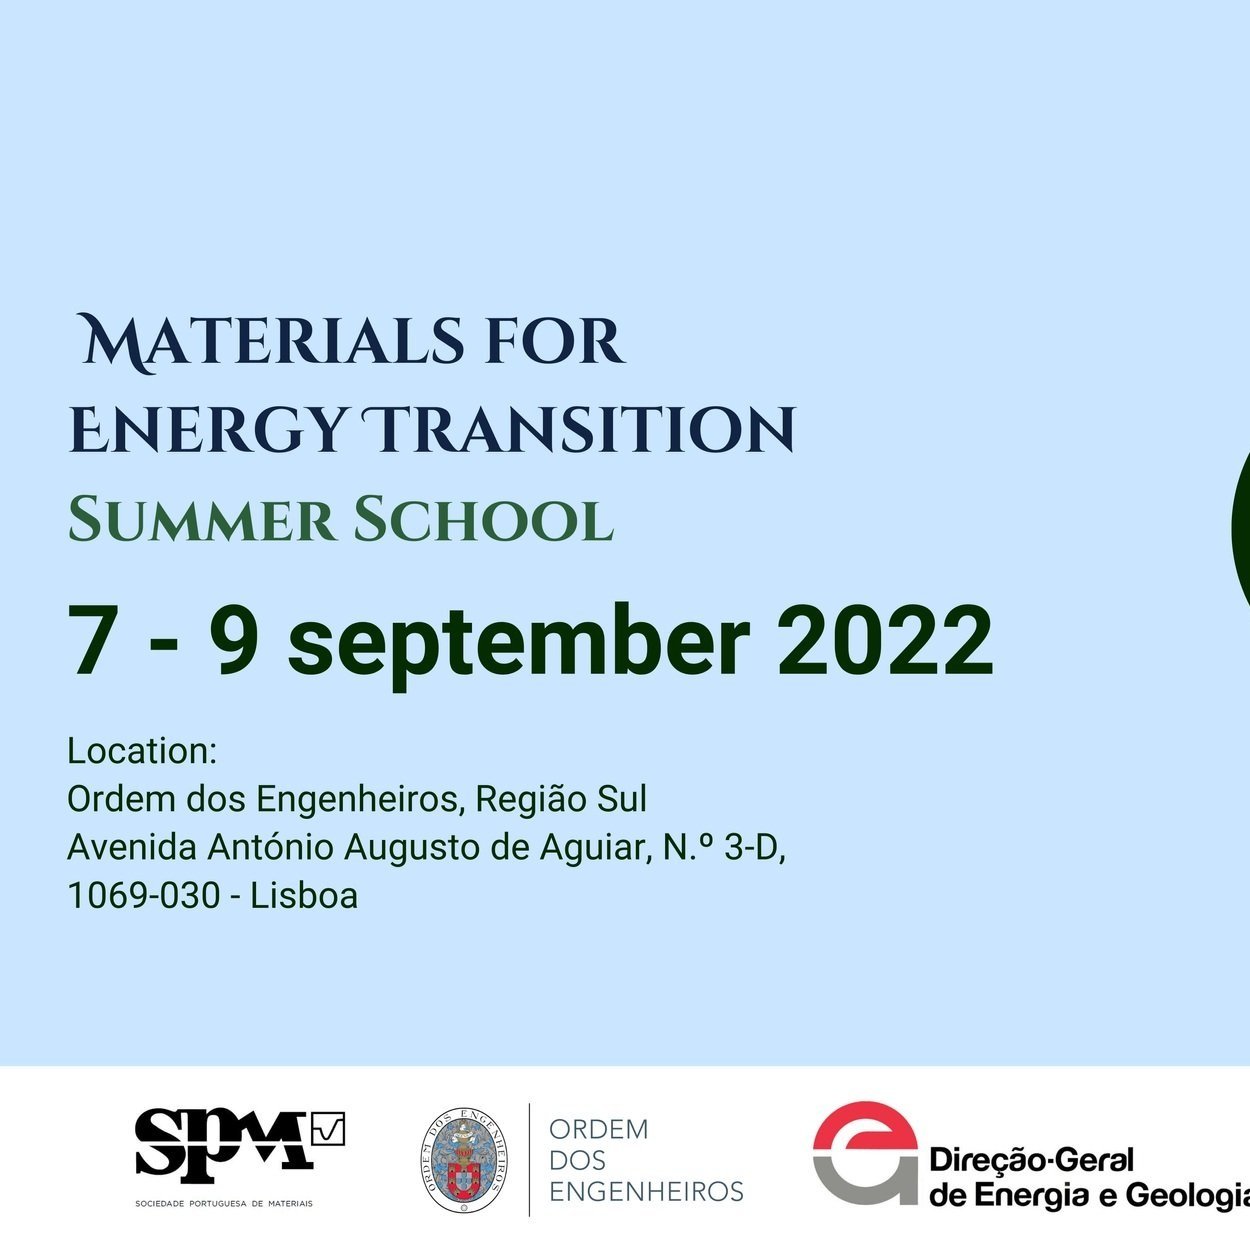 Summer School on Materials for Energy Transition between 7-9 of September 2022